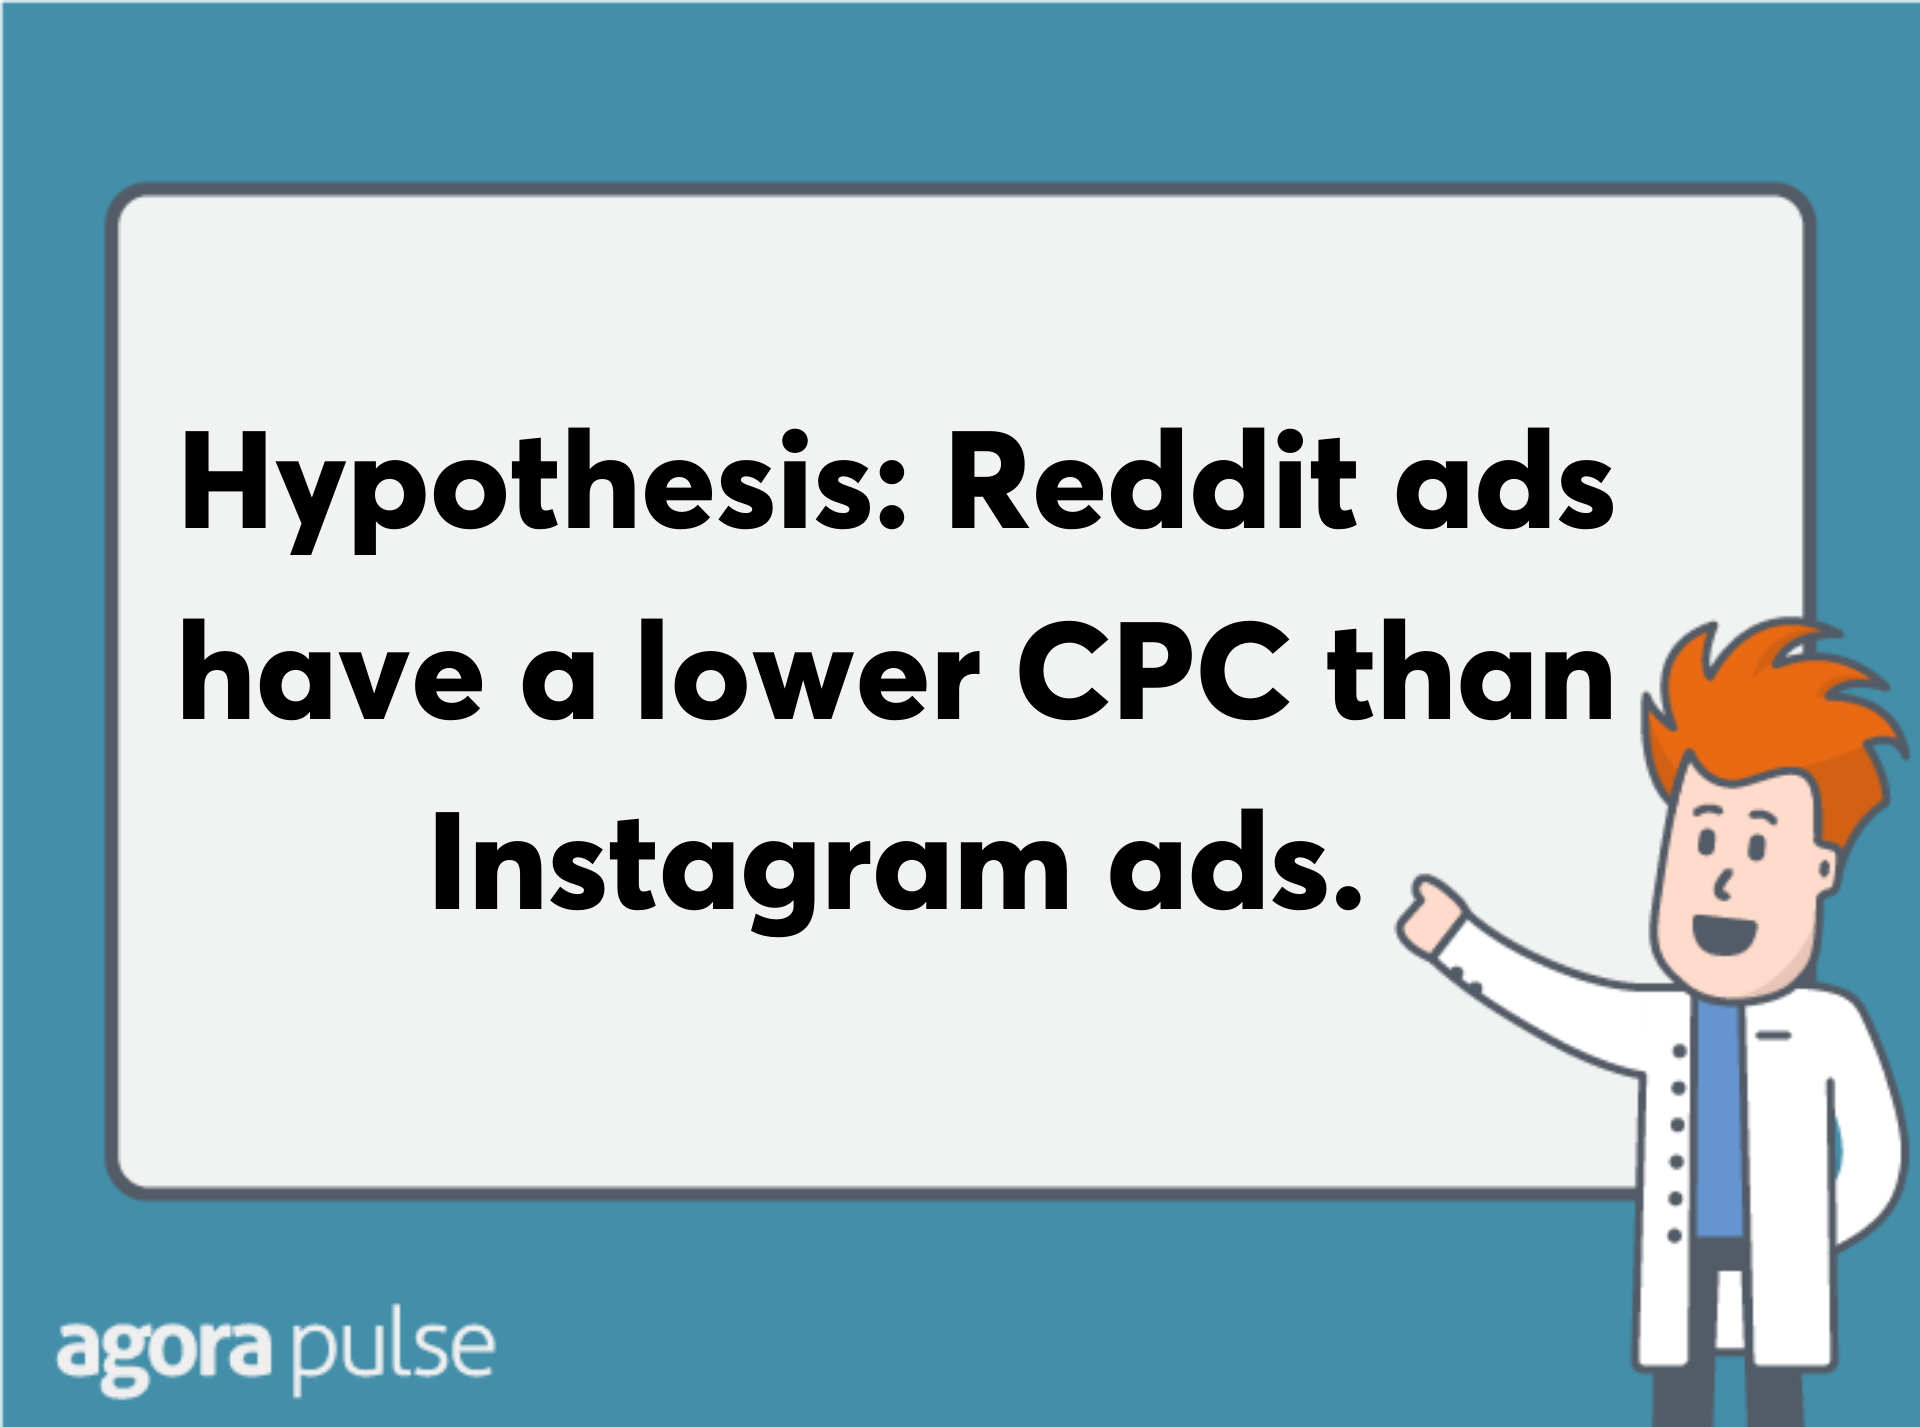 Hypothesis: Reddit ads have a lower CPC than Instagram ads. 